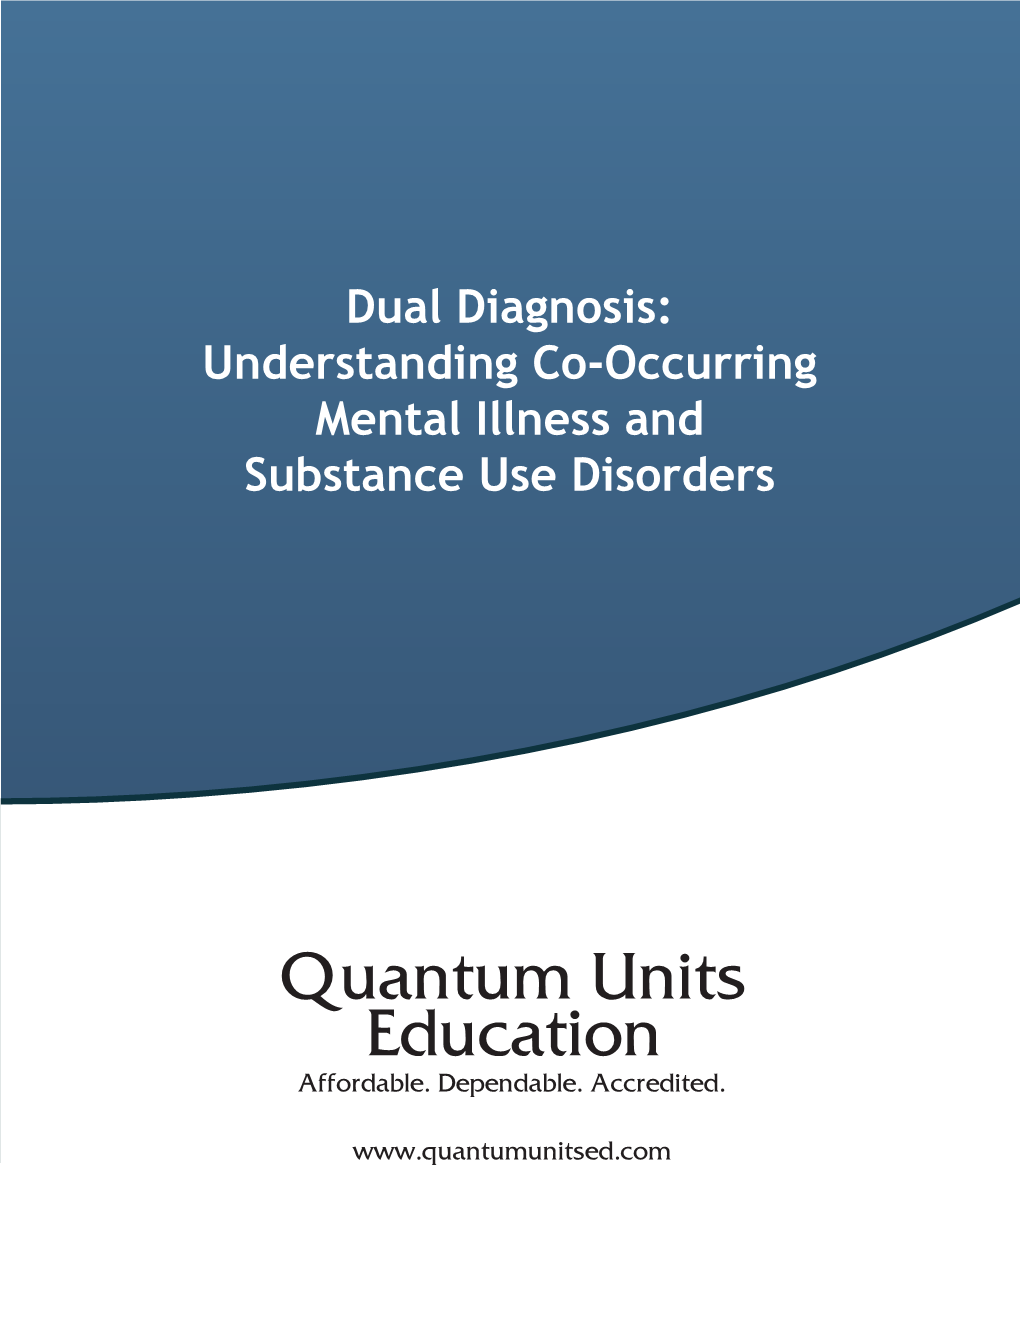 Dual Diagnosis: Understanding Co-Occurring Mental Illness and Substance Use Disorders